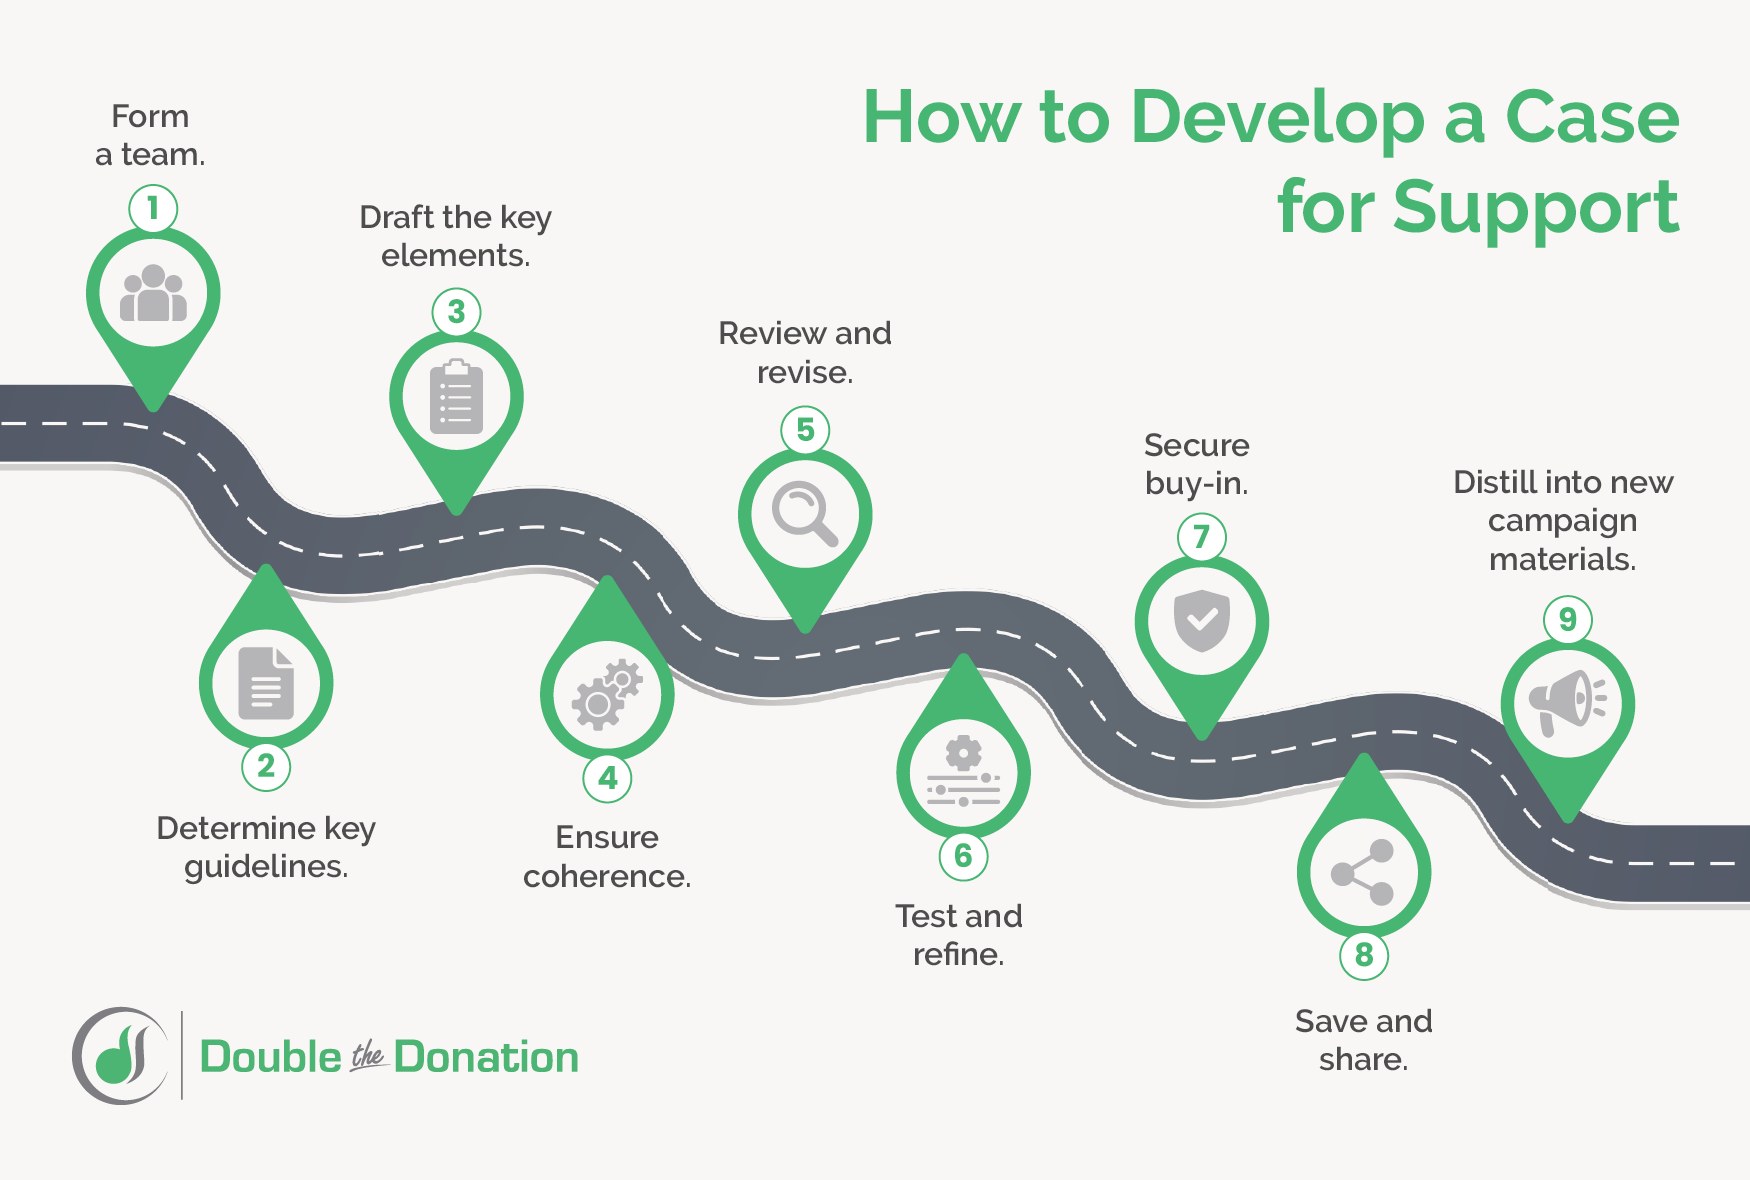 The steps for creating a nonprofit case for support, explained in the text below